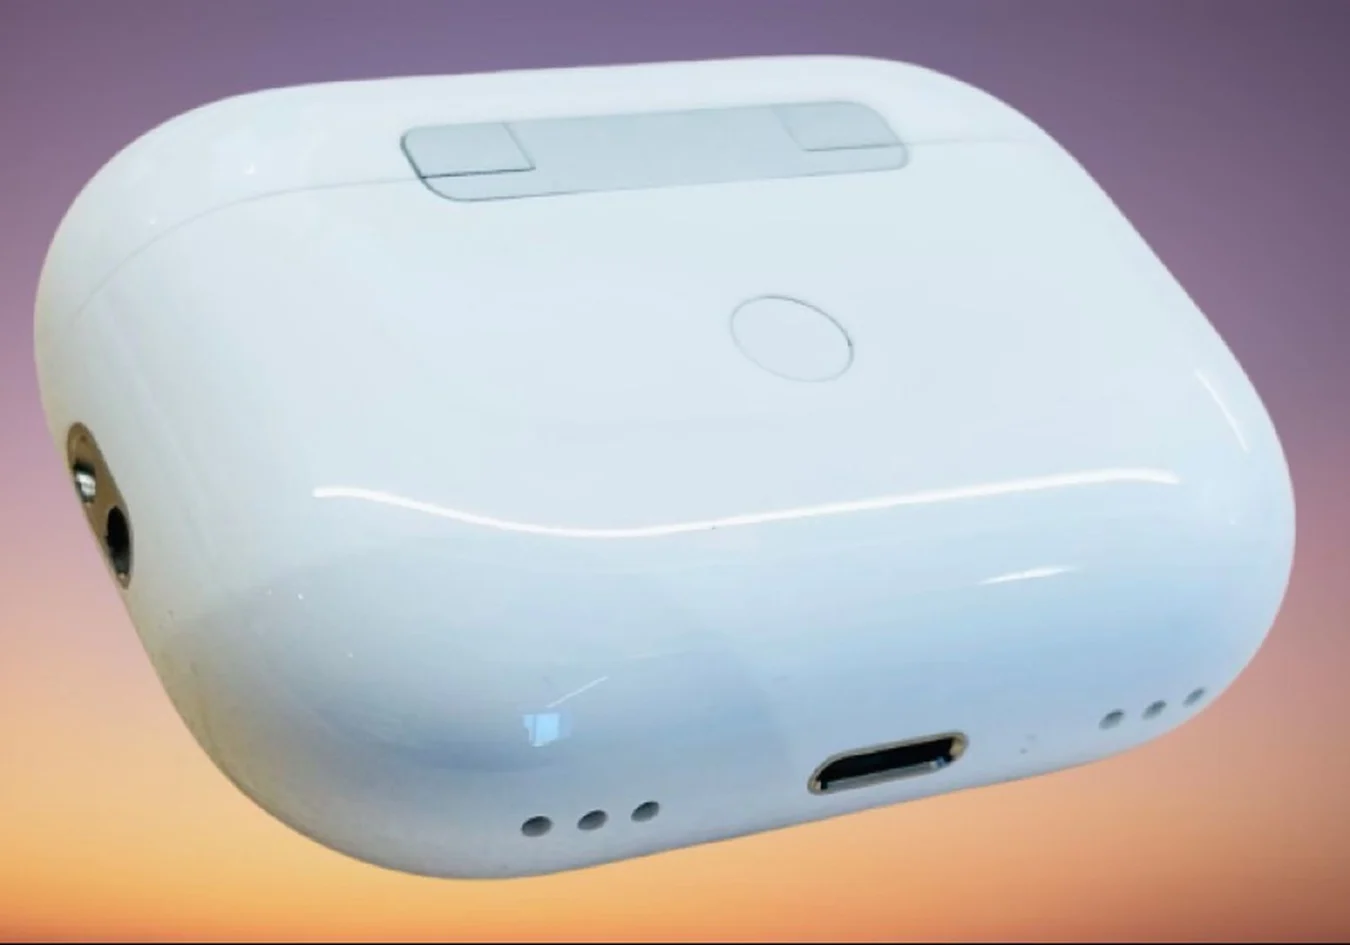 AirPods Pro 2 case render